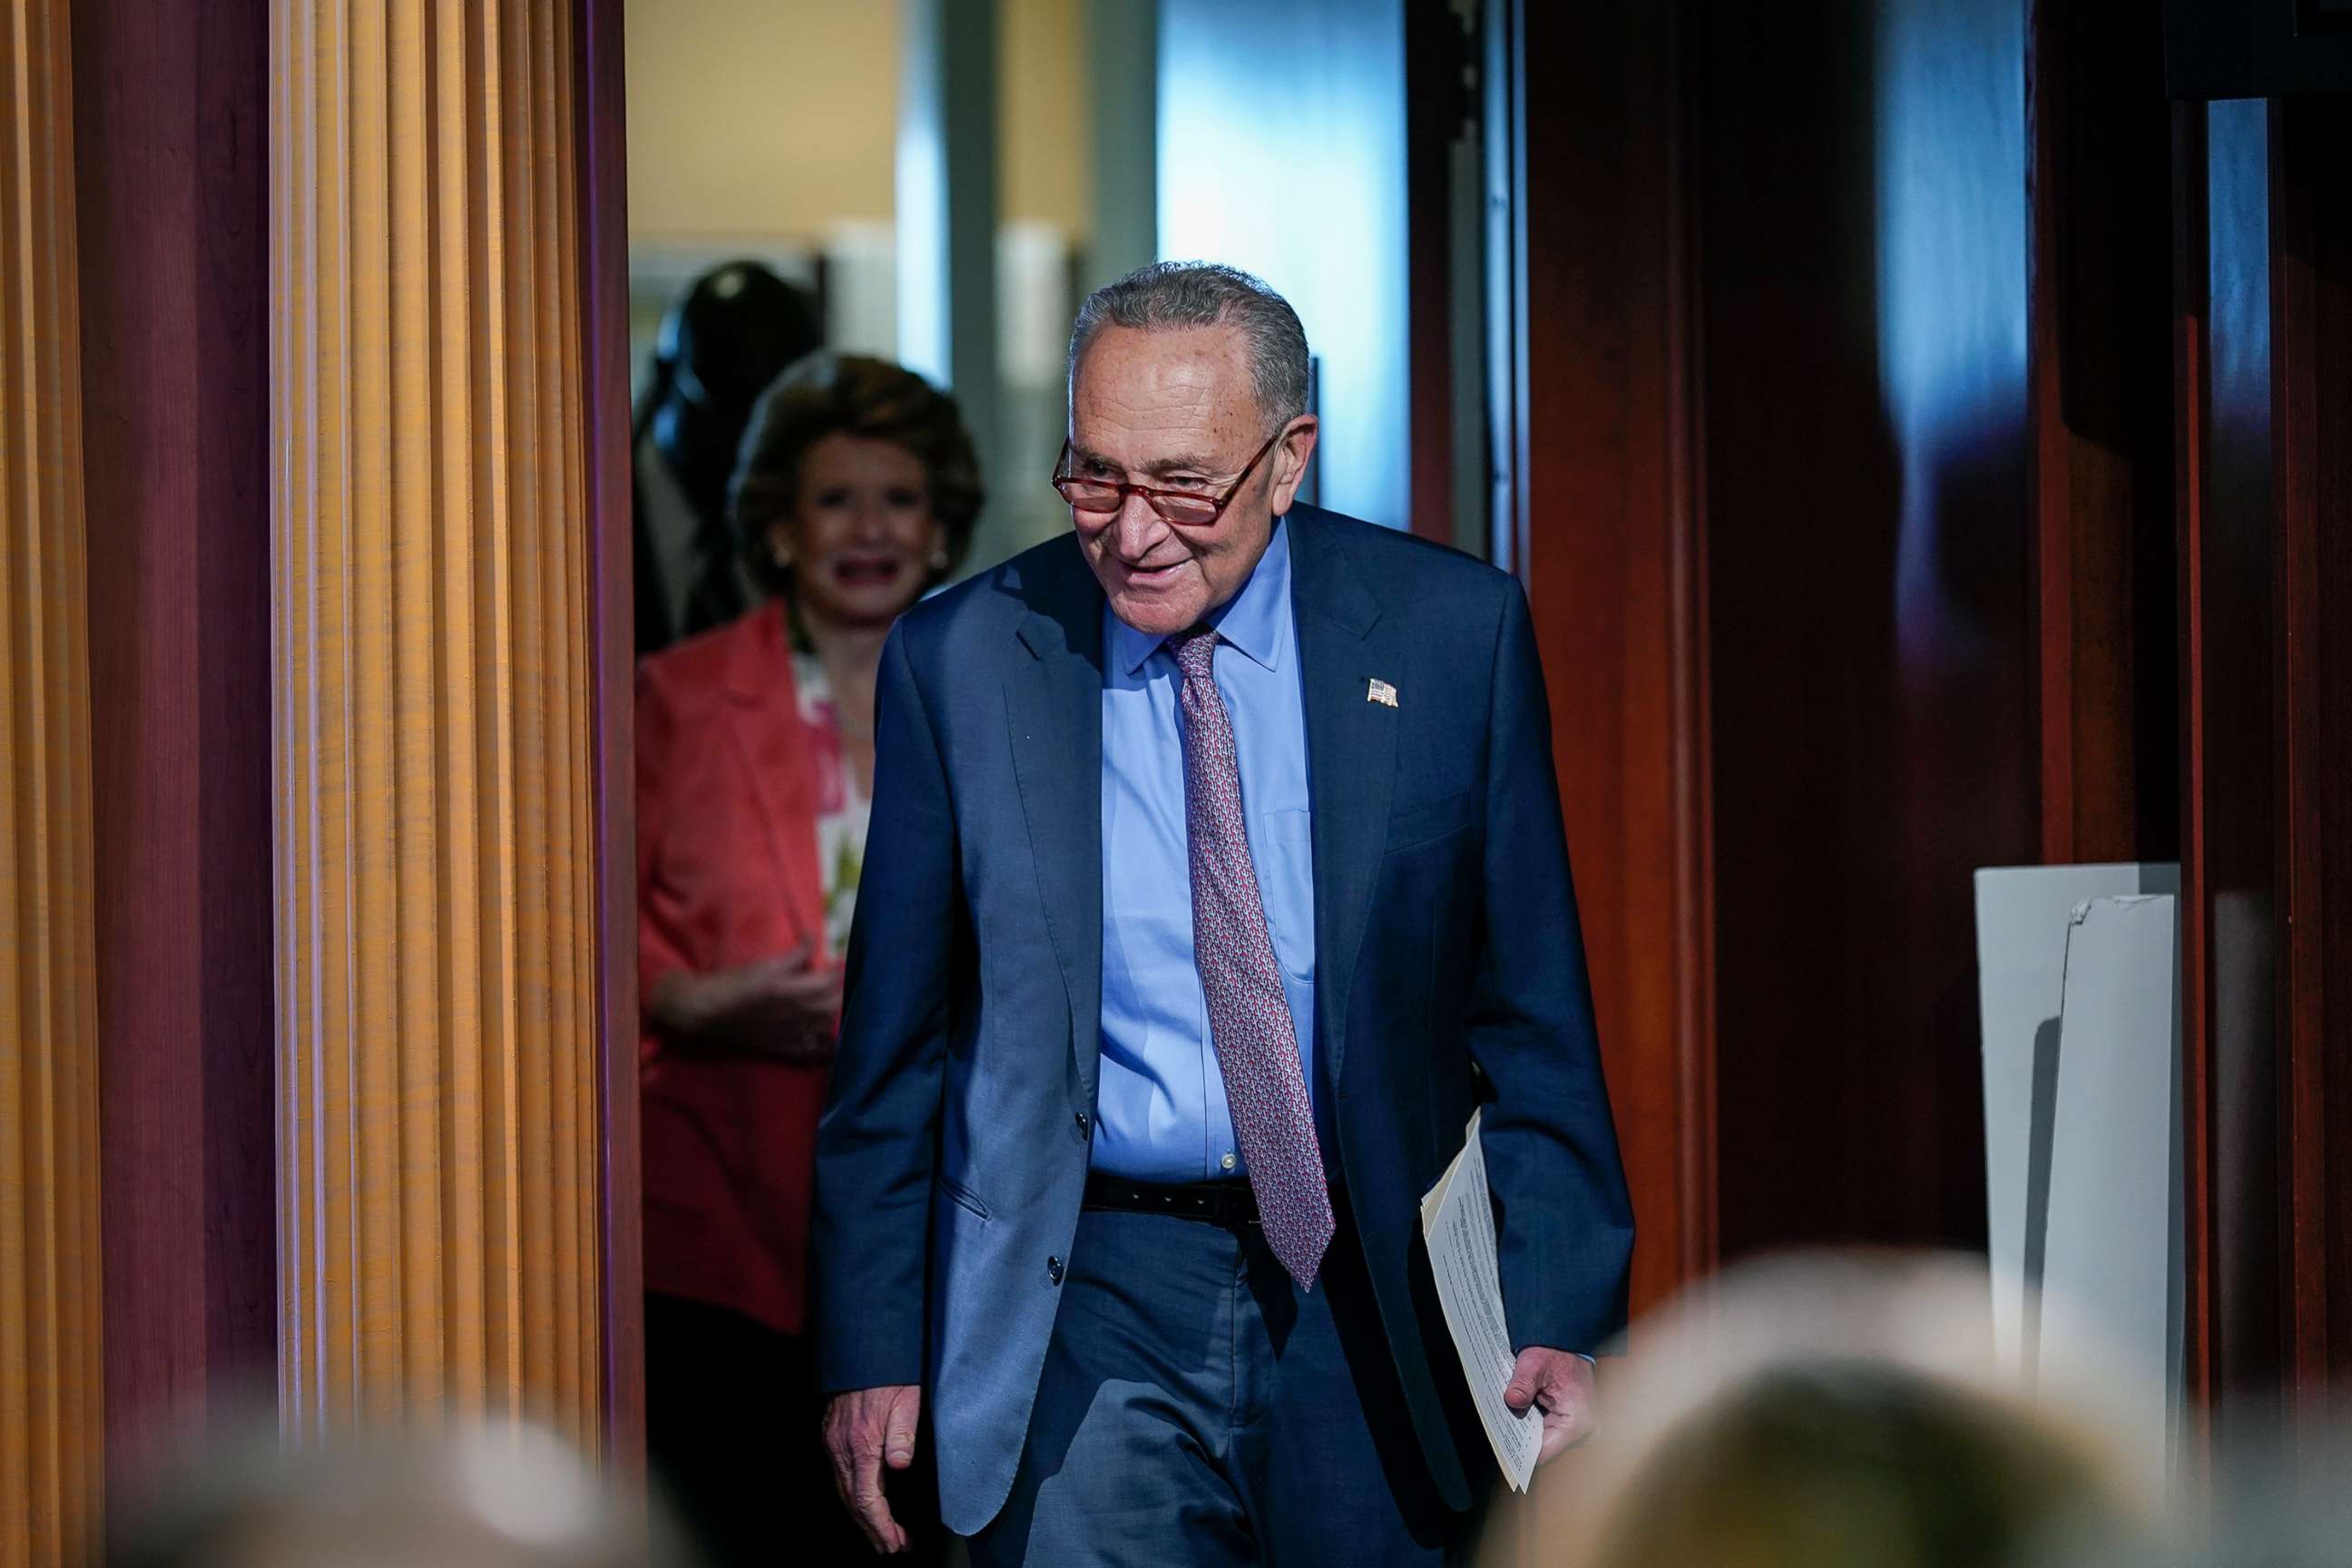 PHOTO: Senate Majority Leader Chuck Schumer followed by Sen. Debbie Stabenow, arrives to speak to reporters, July 26, 2022, at the Capitol in Washington, D.C.